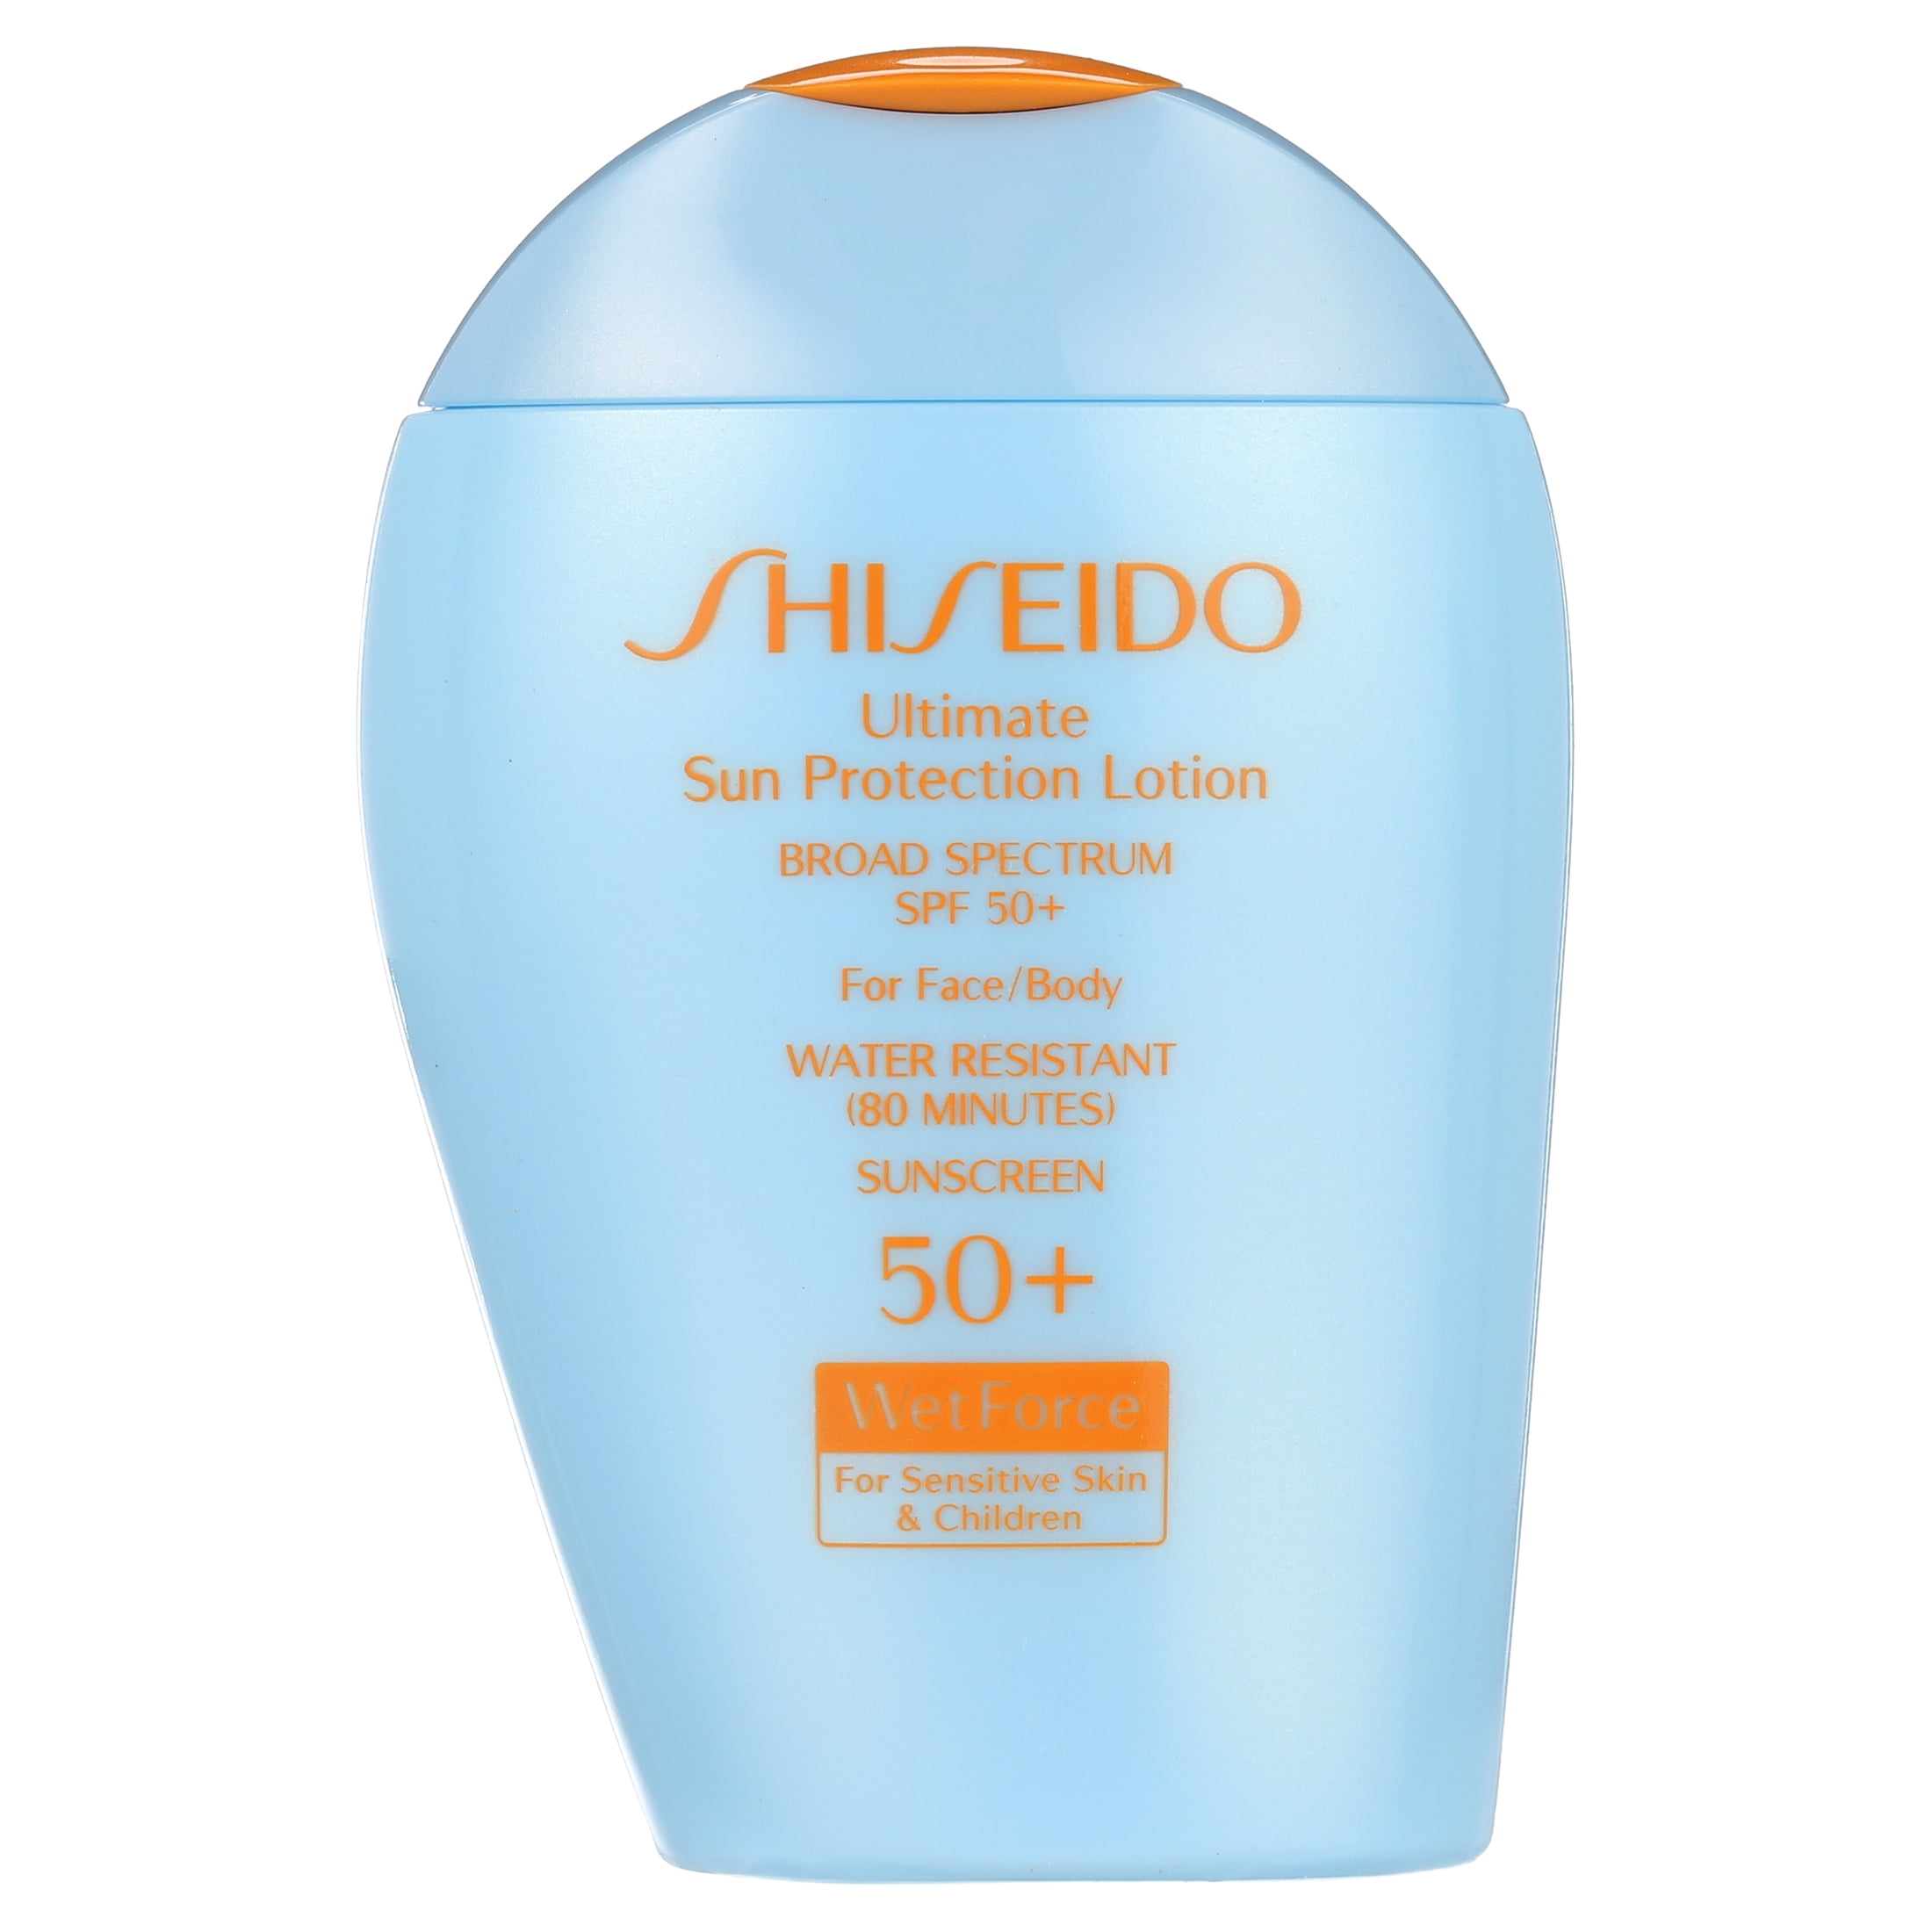 Ultimate Sun Protection Lotion WetForce SPF 50 for Sensitive Skin and Children by Shiseido for Unise Walmart.com